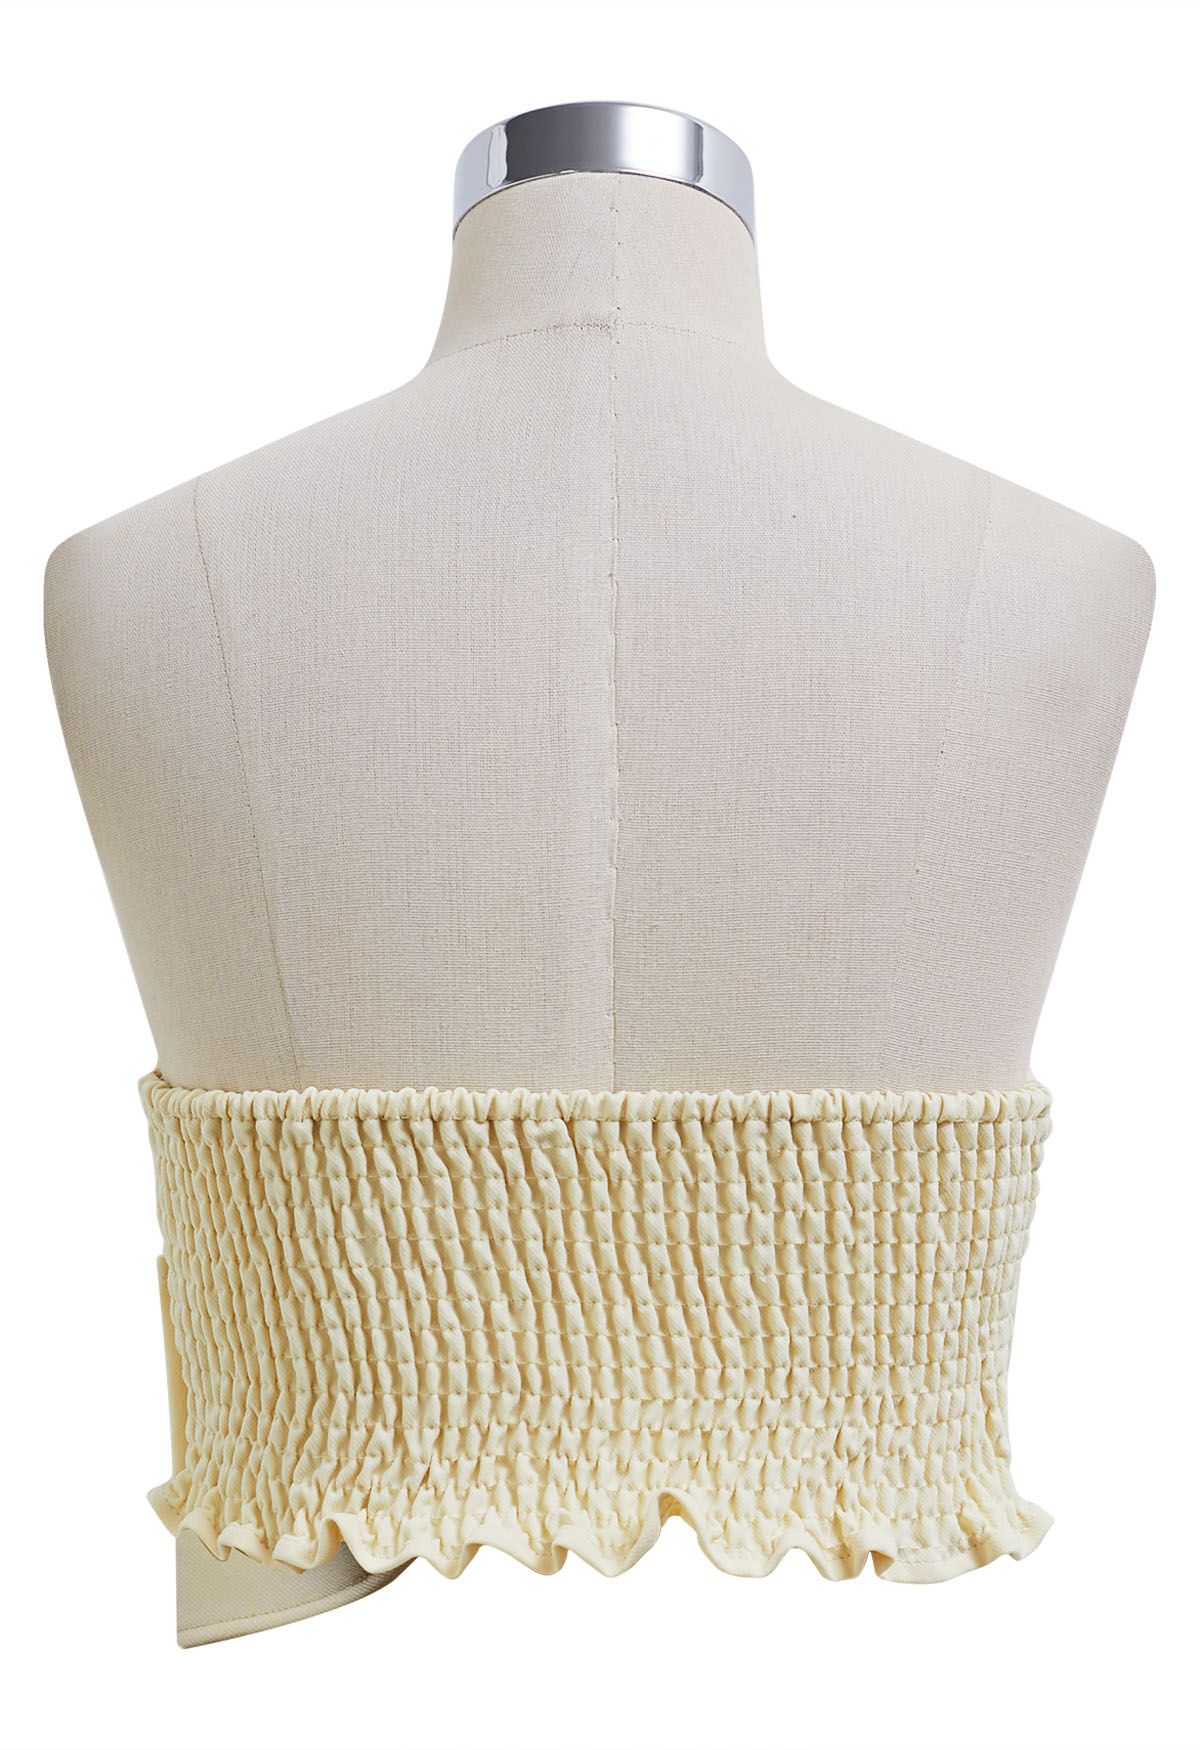 Knotted Front Bustier Crop Top in Light Yellow